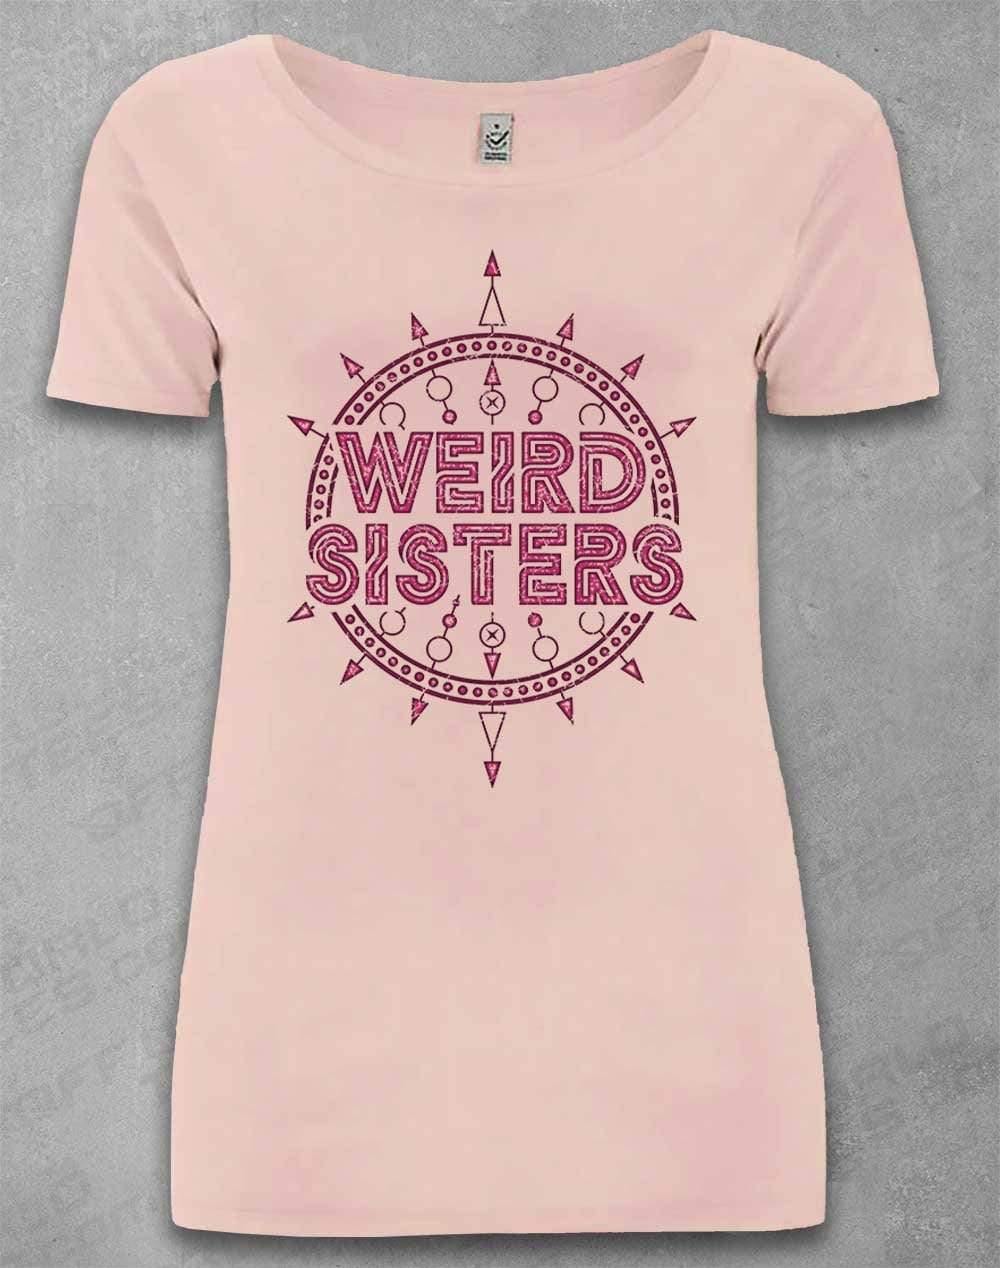 DELUXE Weird Sisters Band Logo Organic Scoop Neck T-Shirt 8-10 / Light Pink  - Off World Tees